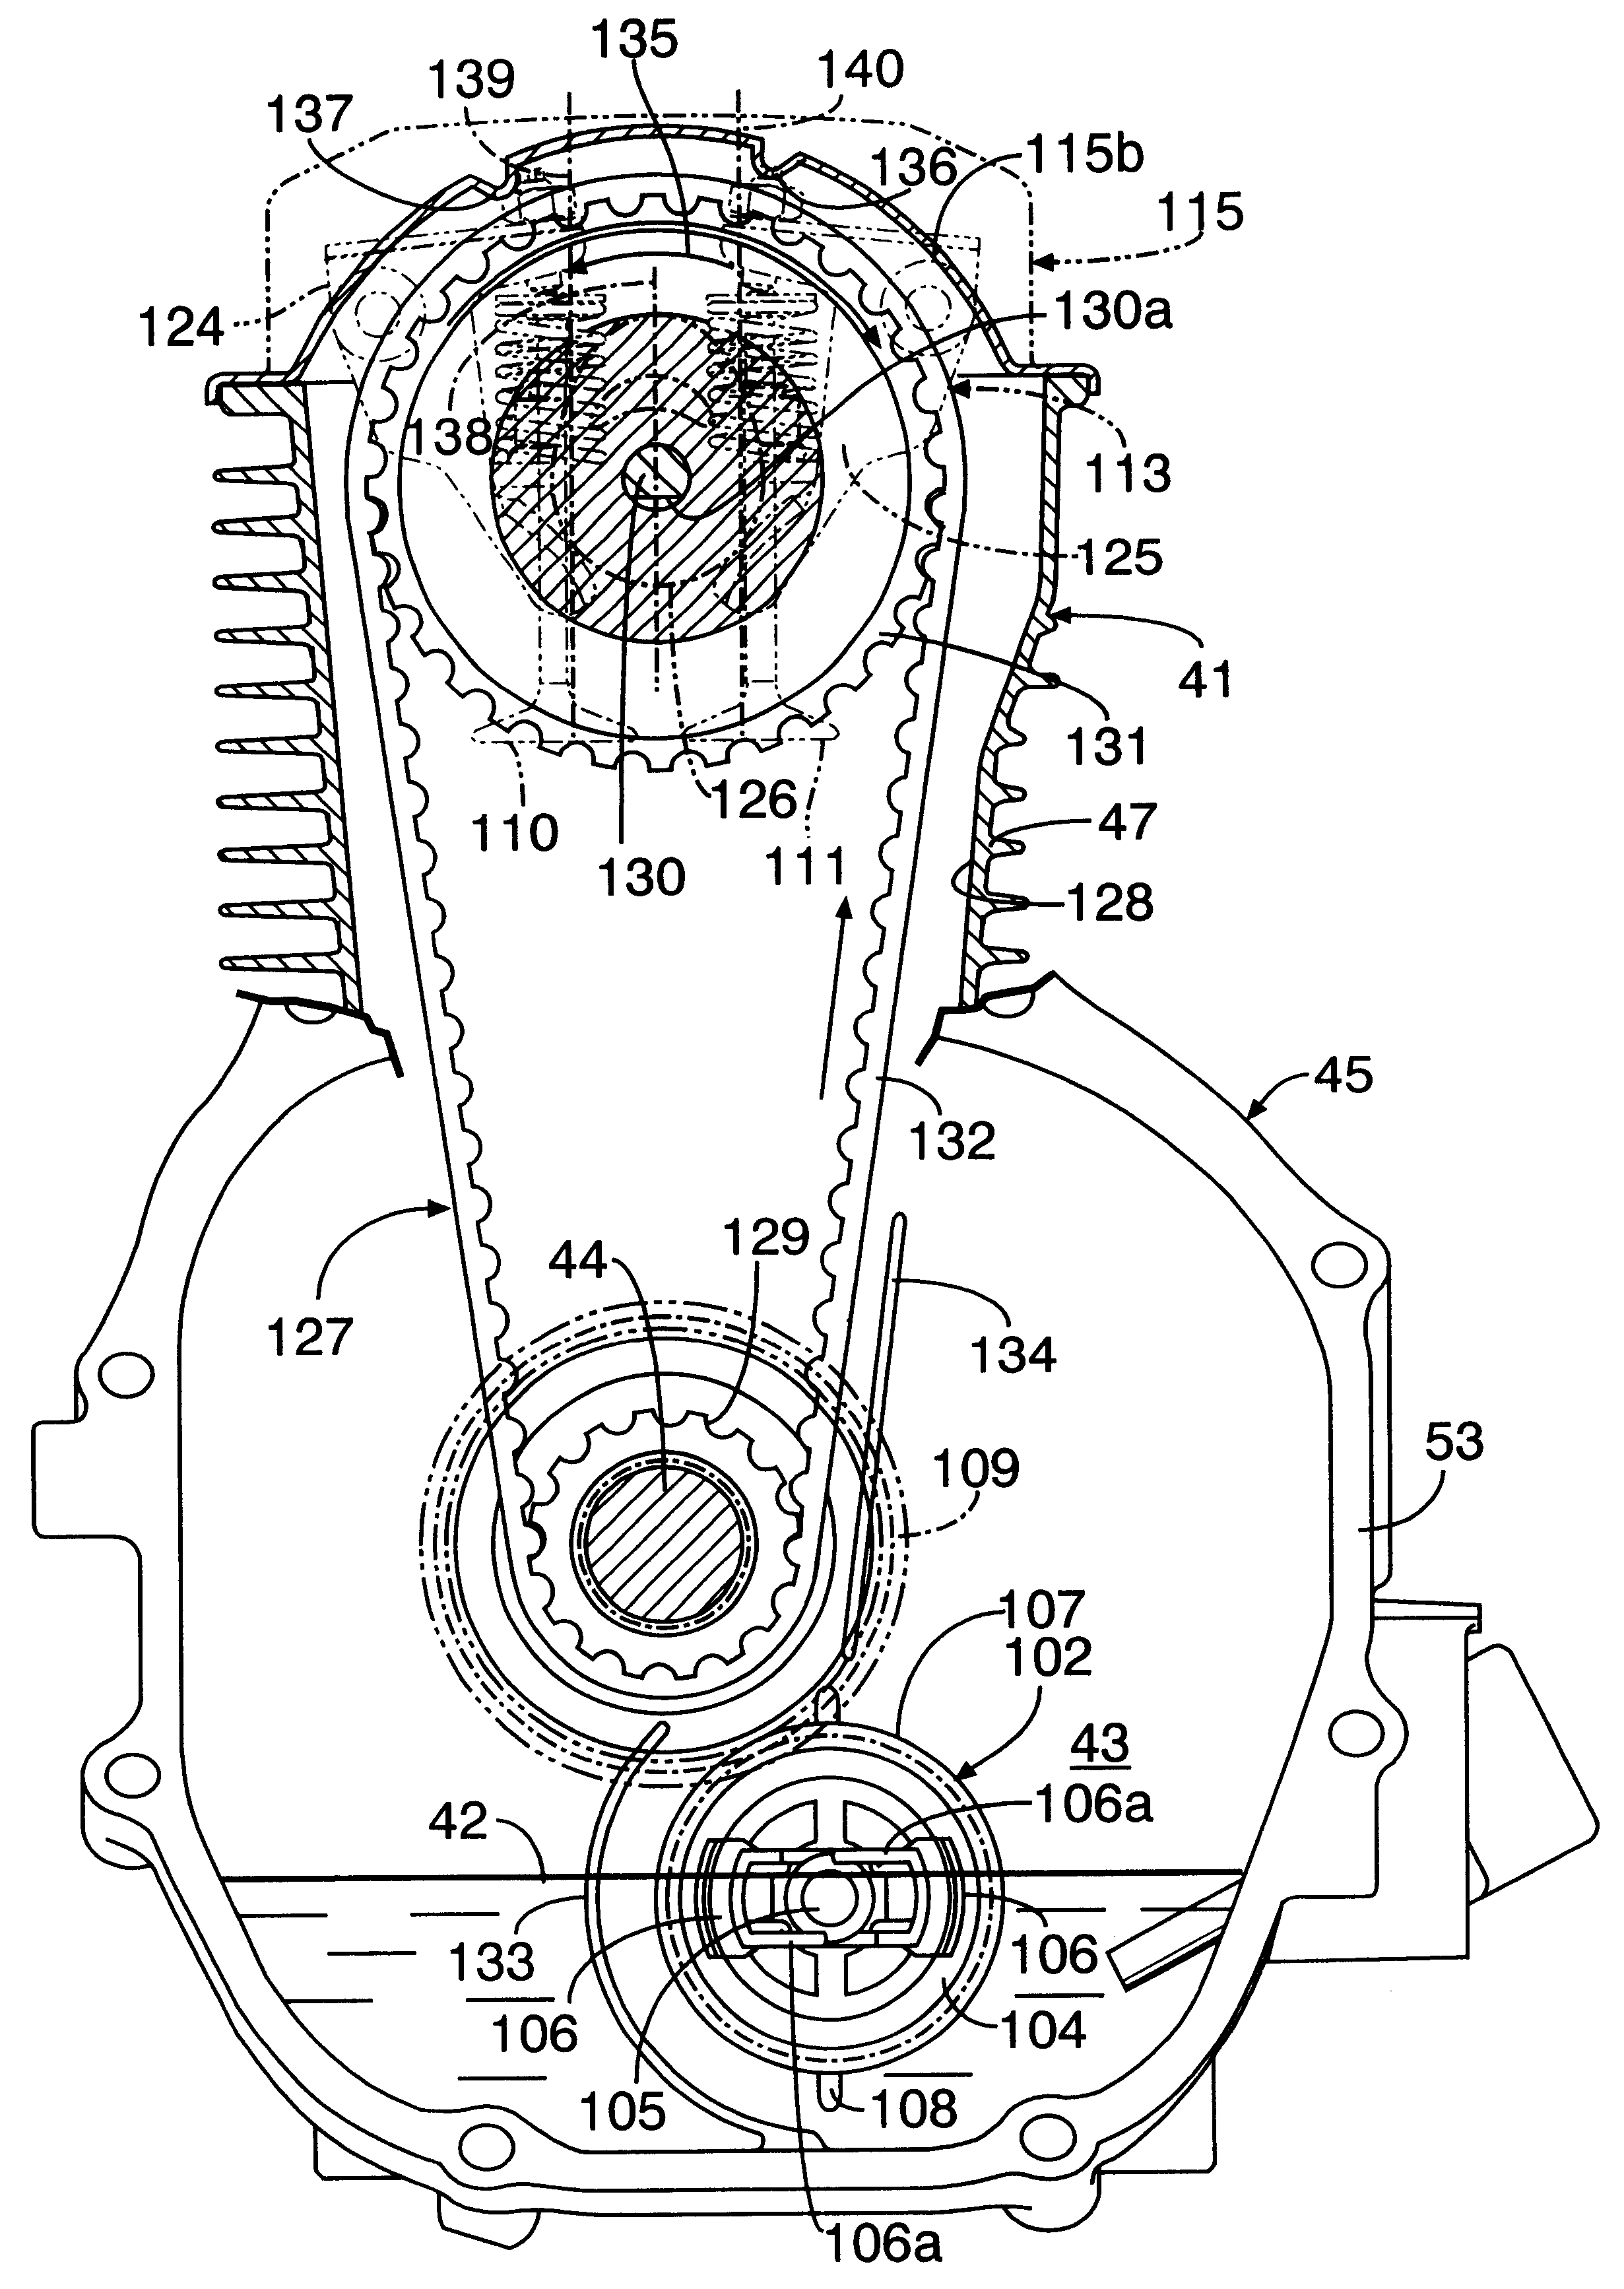 Lubrication structure in OHC engine